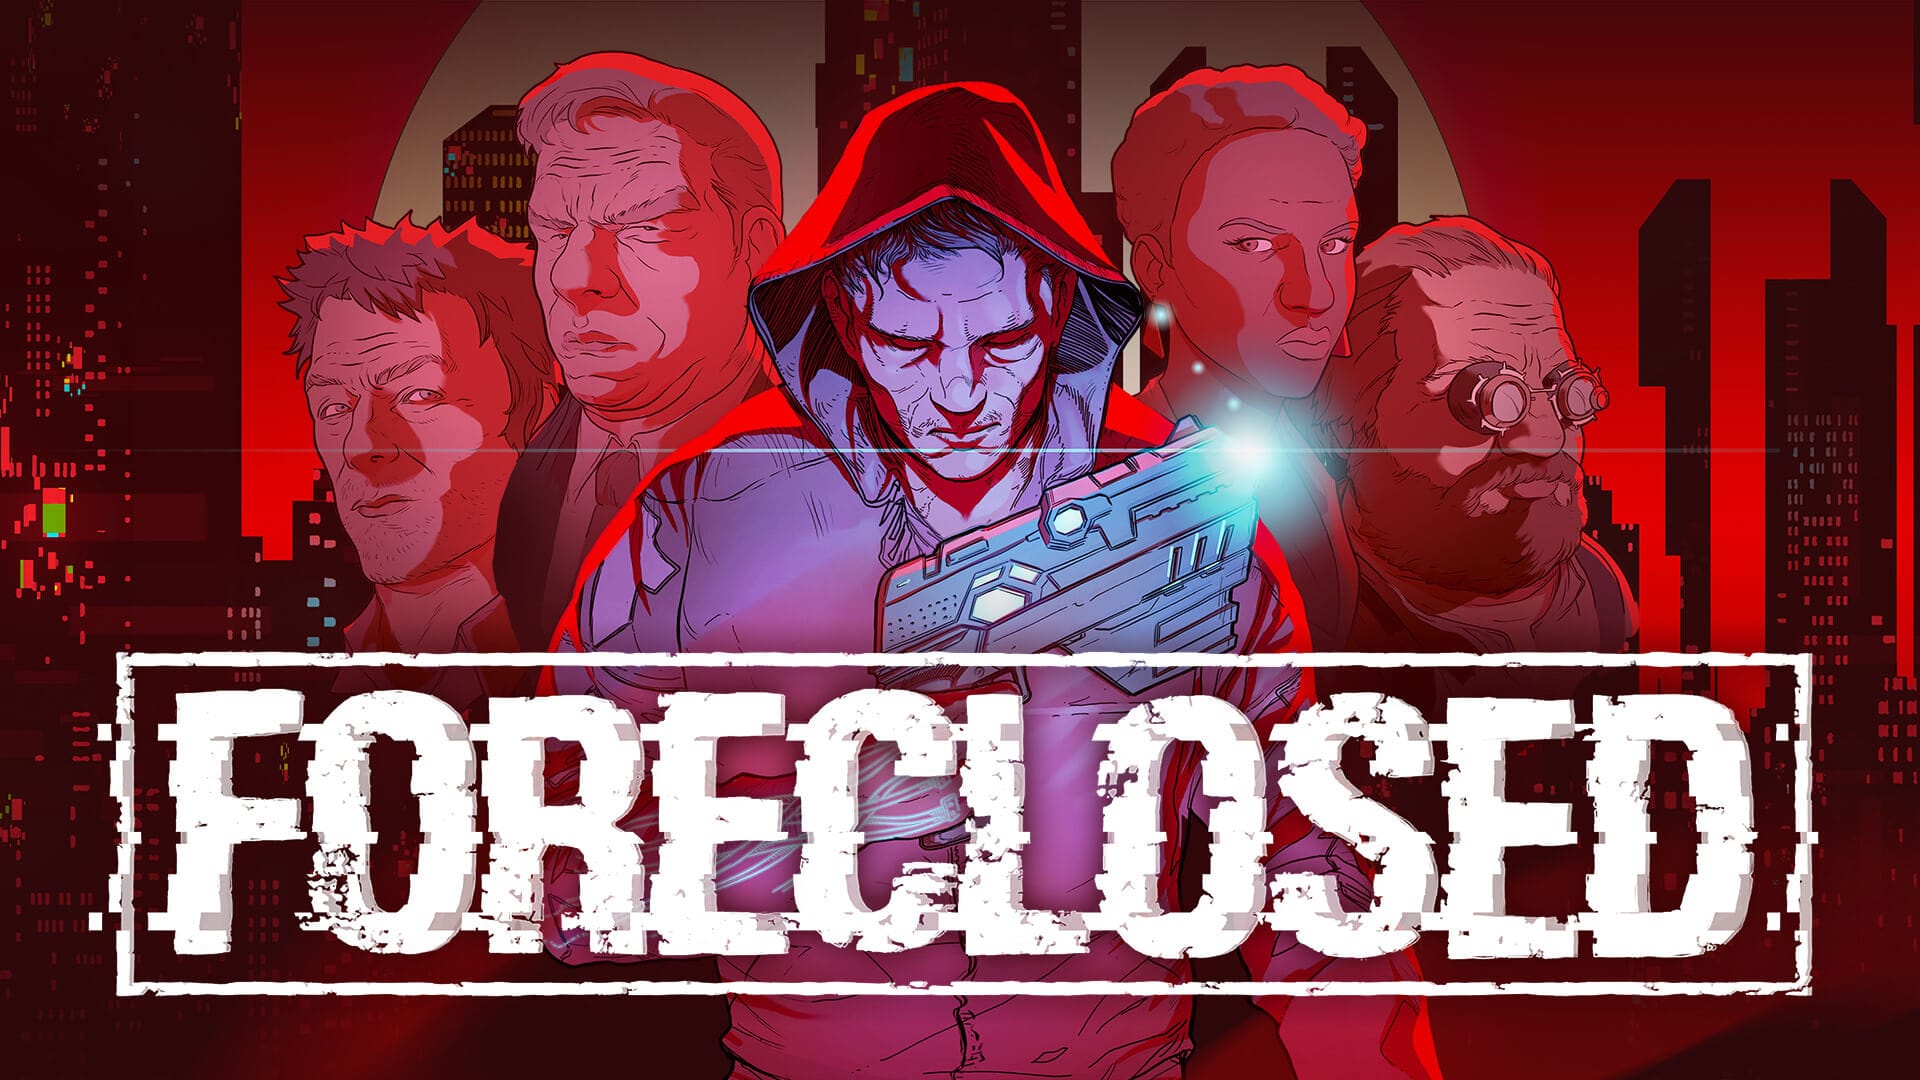 The main key art for Foreclosed